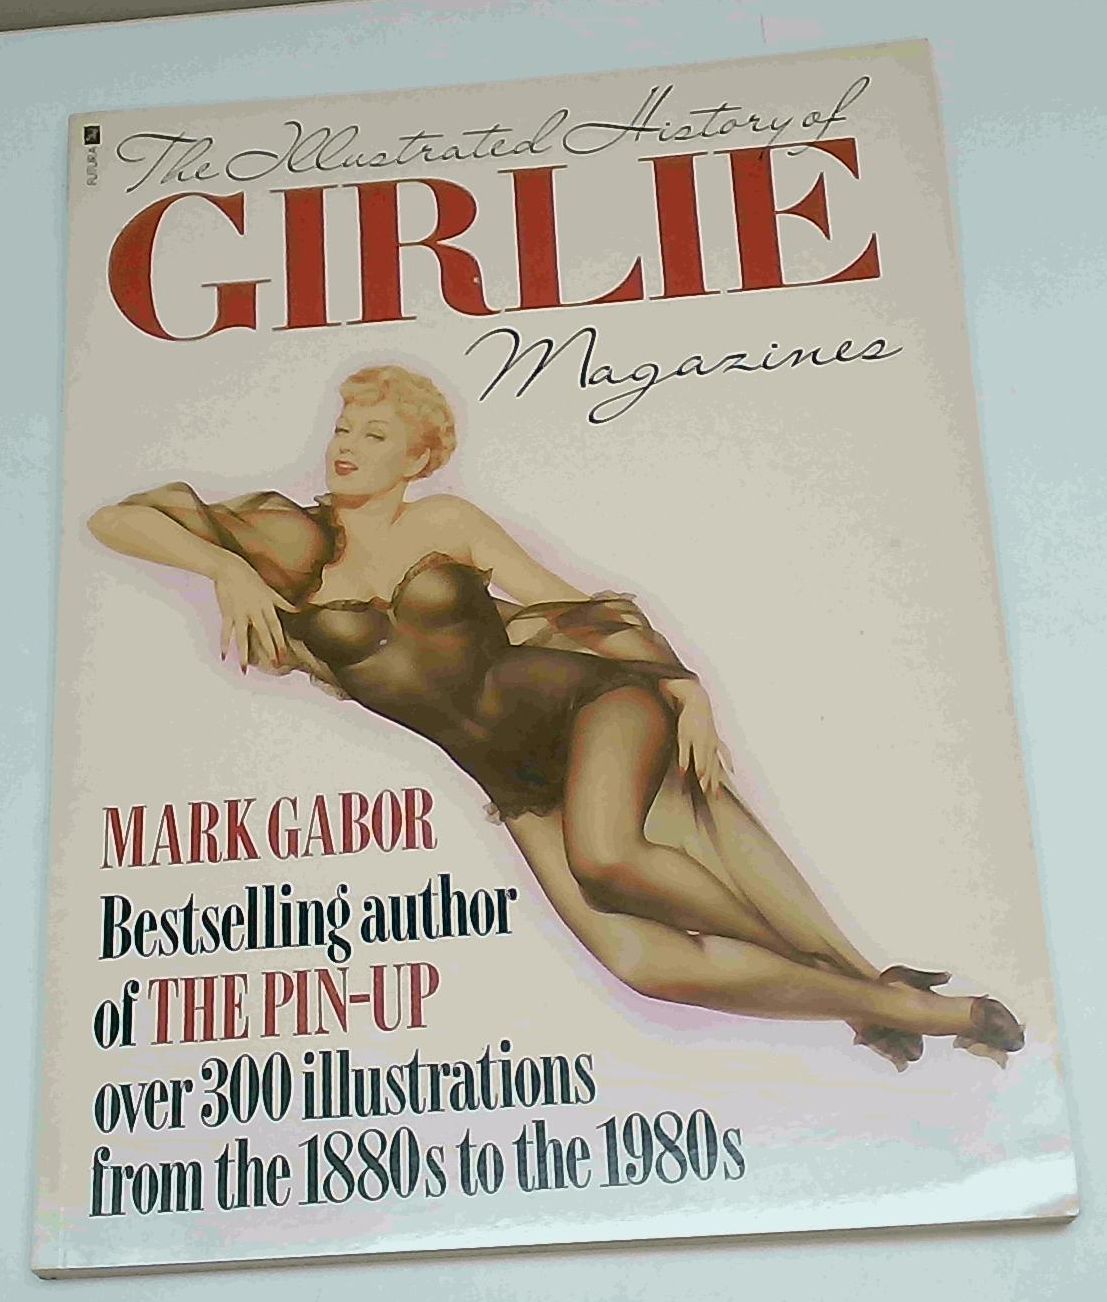 Illustrated History of Girlie magazines